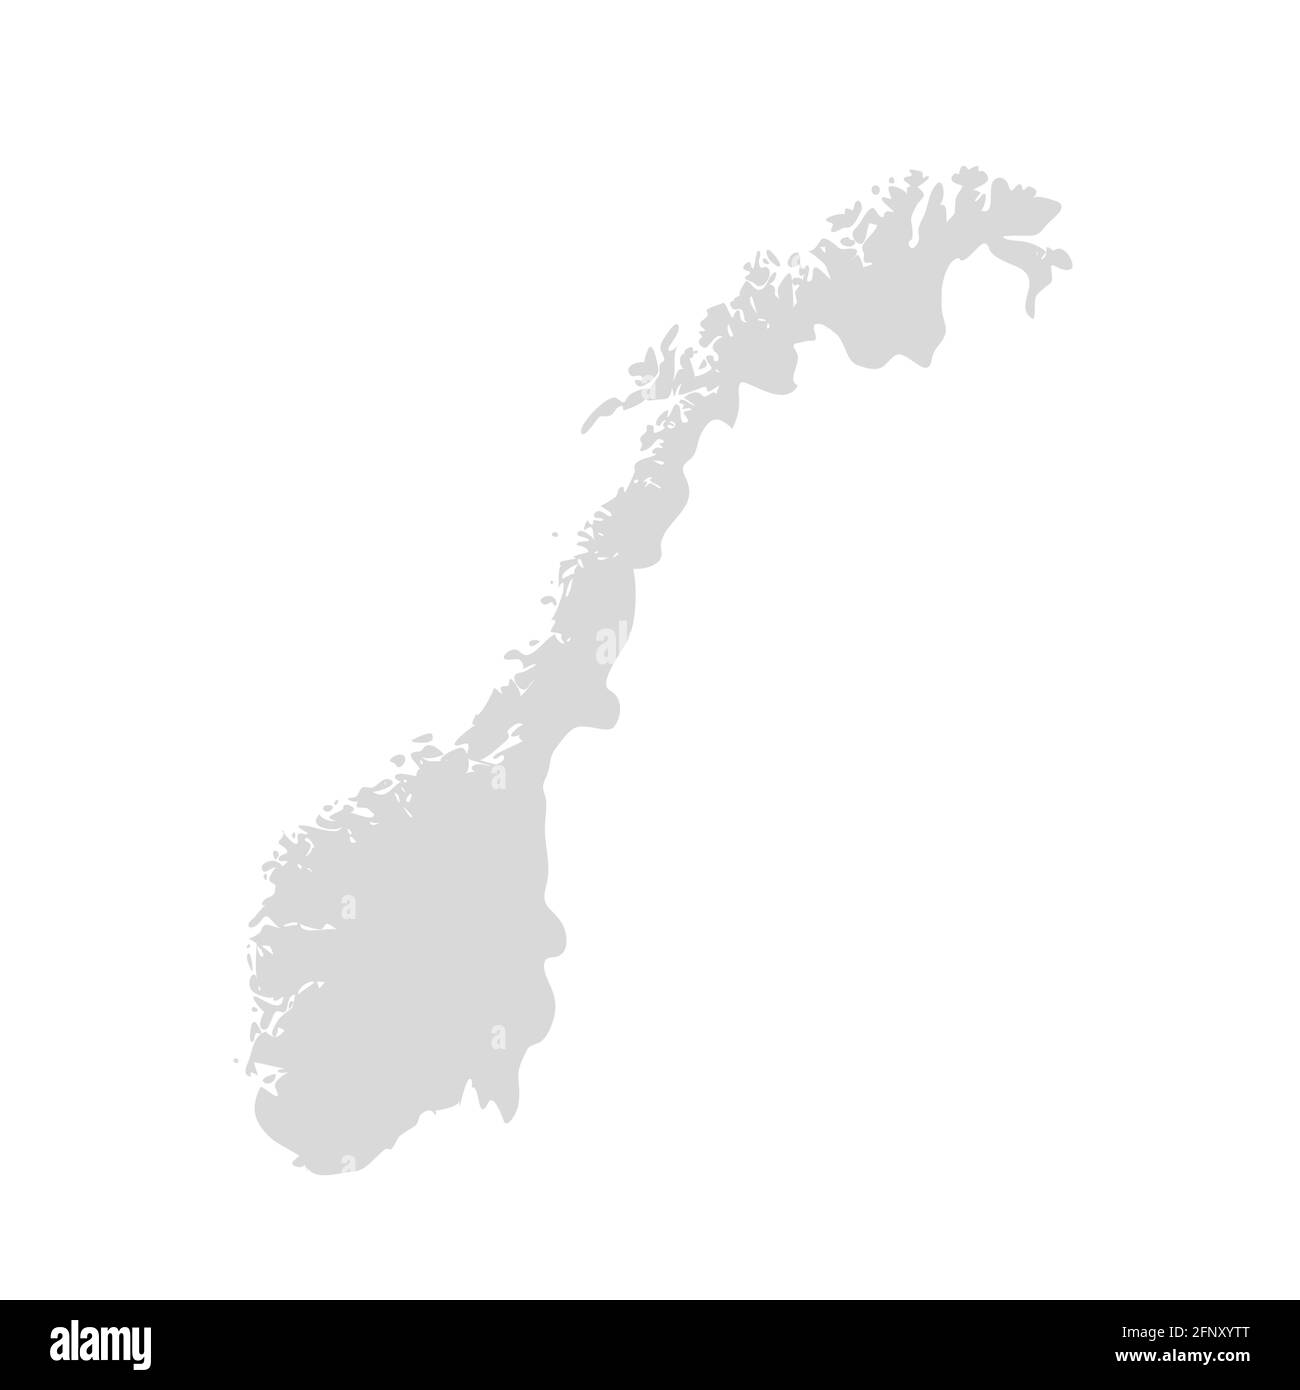 Norway vector map contour country, norwegian map illustration icon Stock Vector